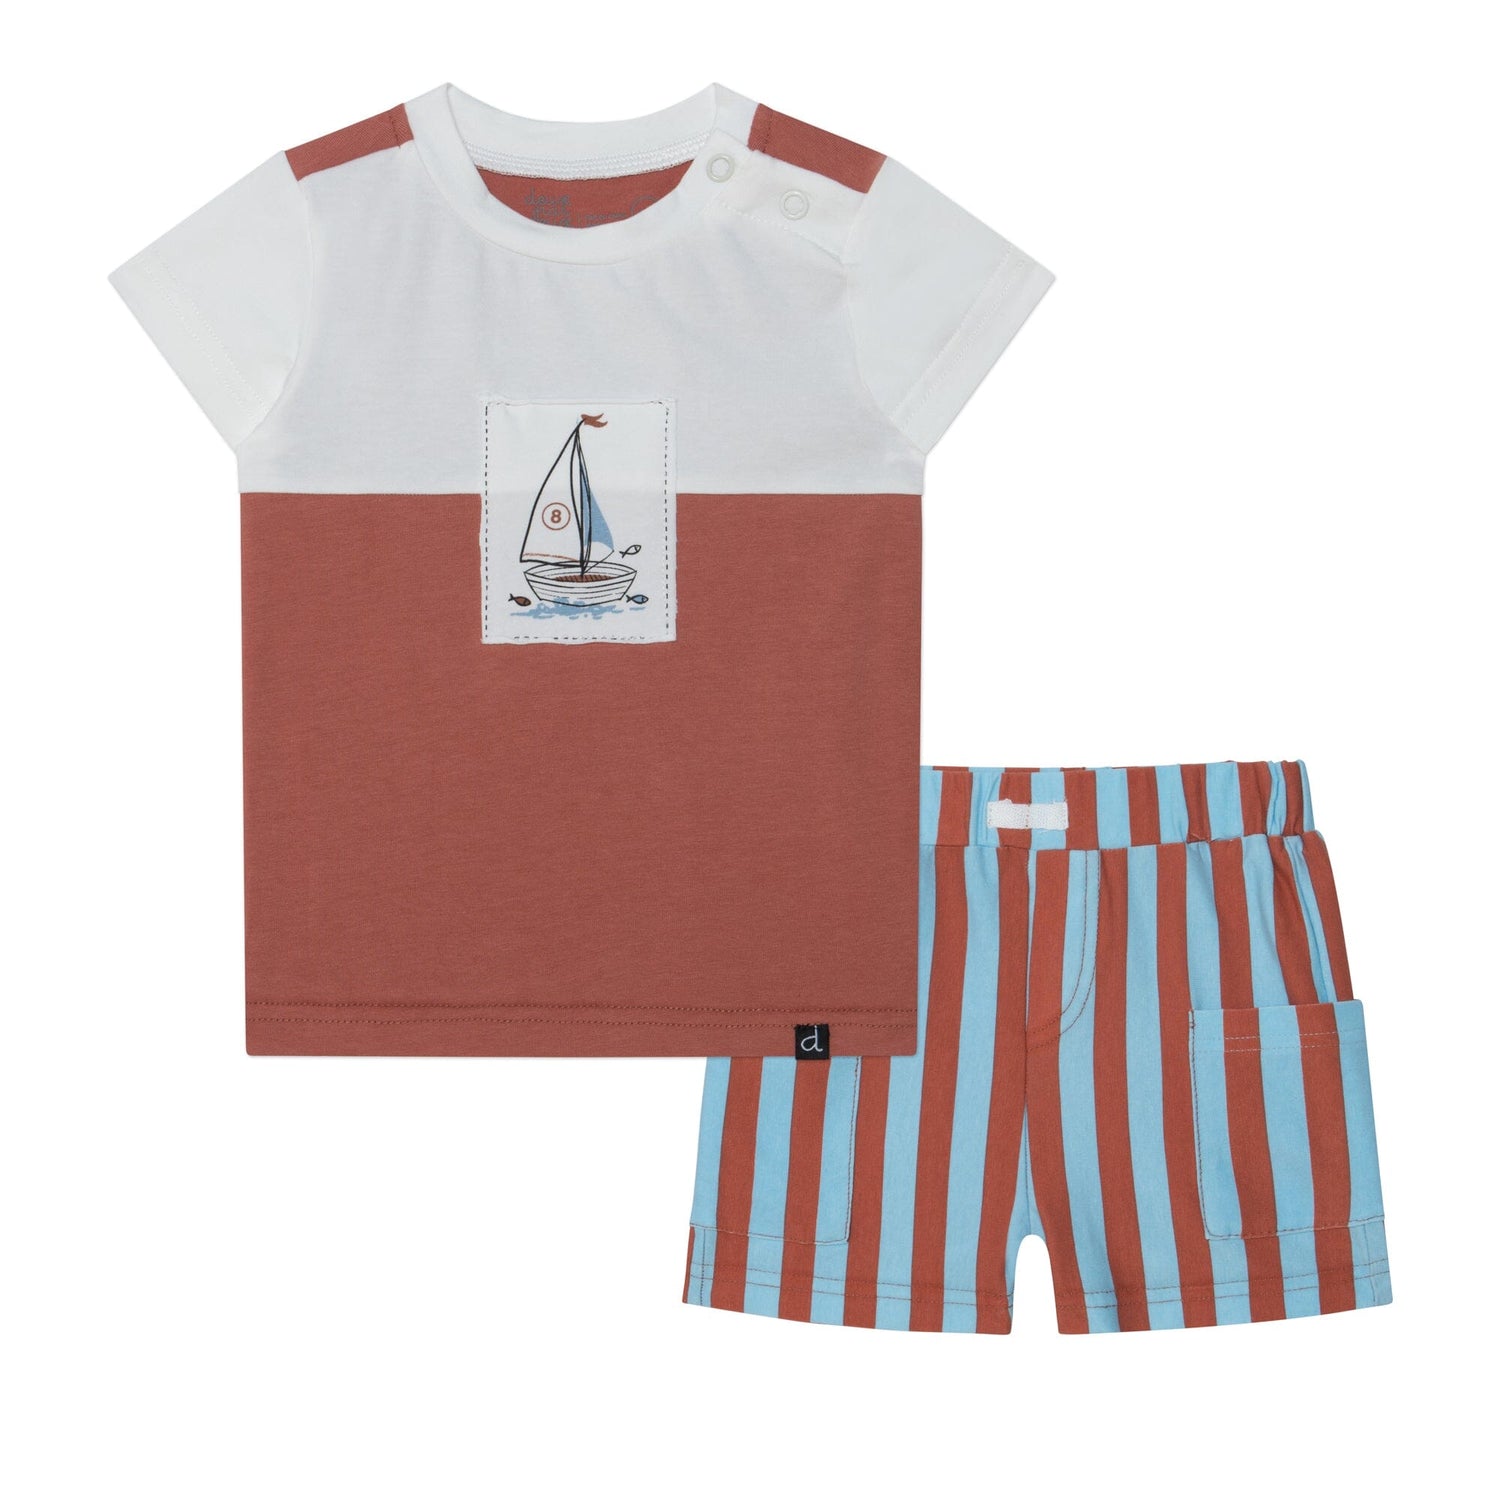 Organic Cotton Colorblocked Top & Short Set White & Brown With Stripe - E30C11_064